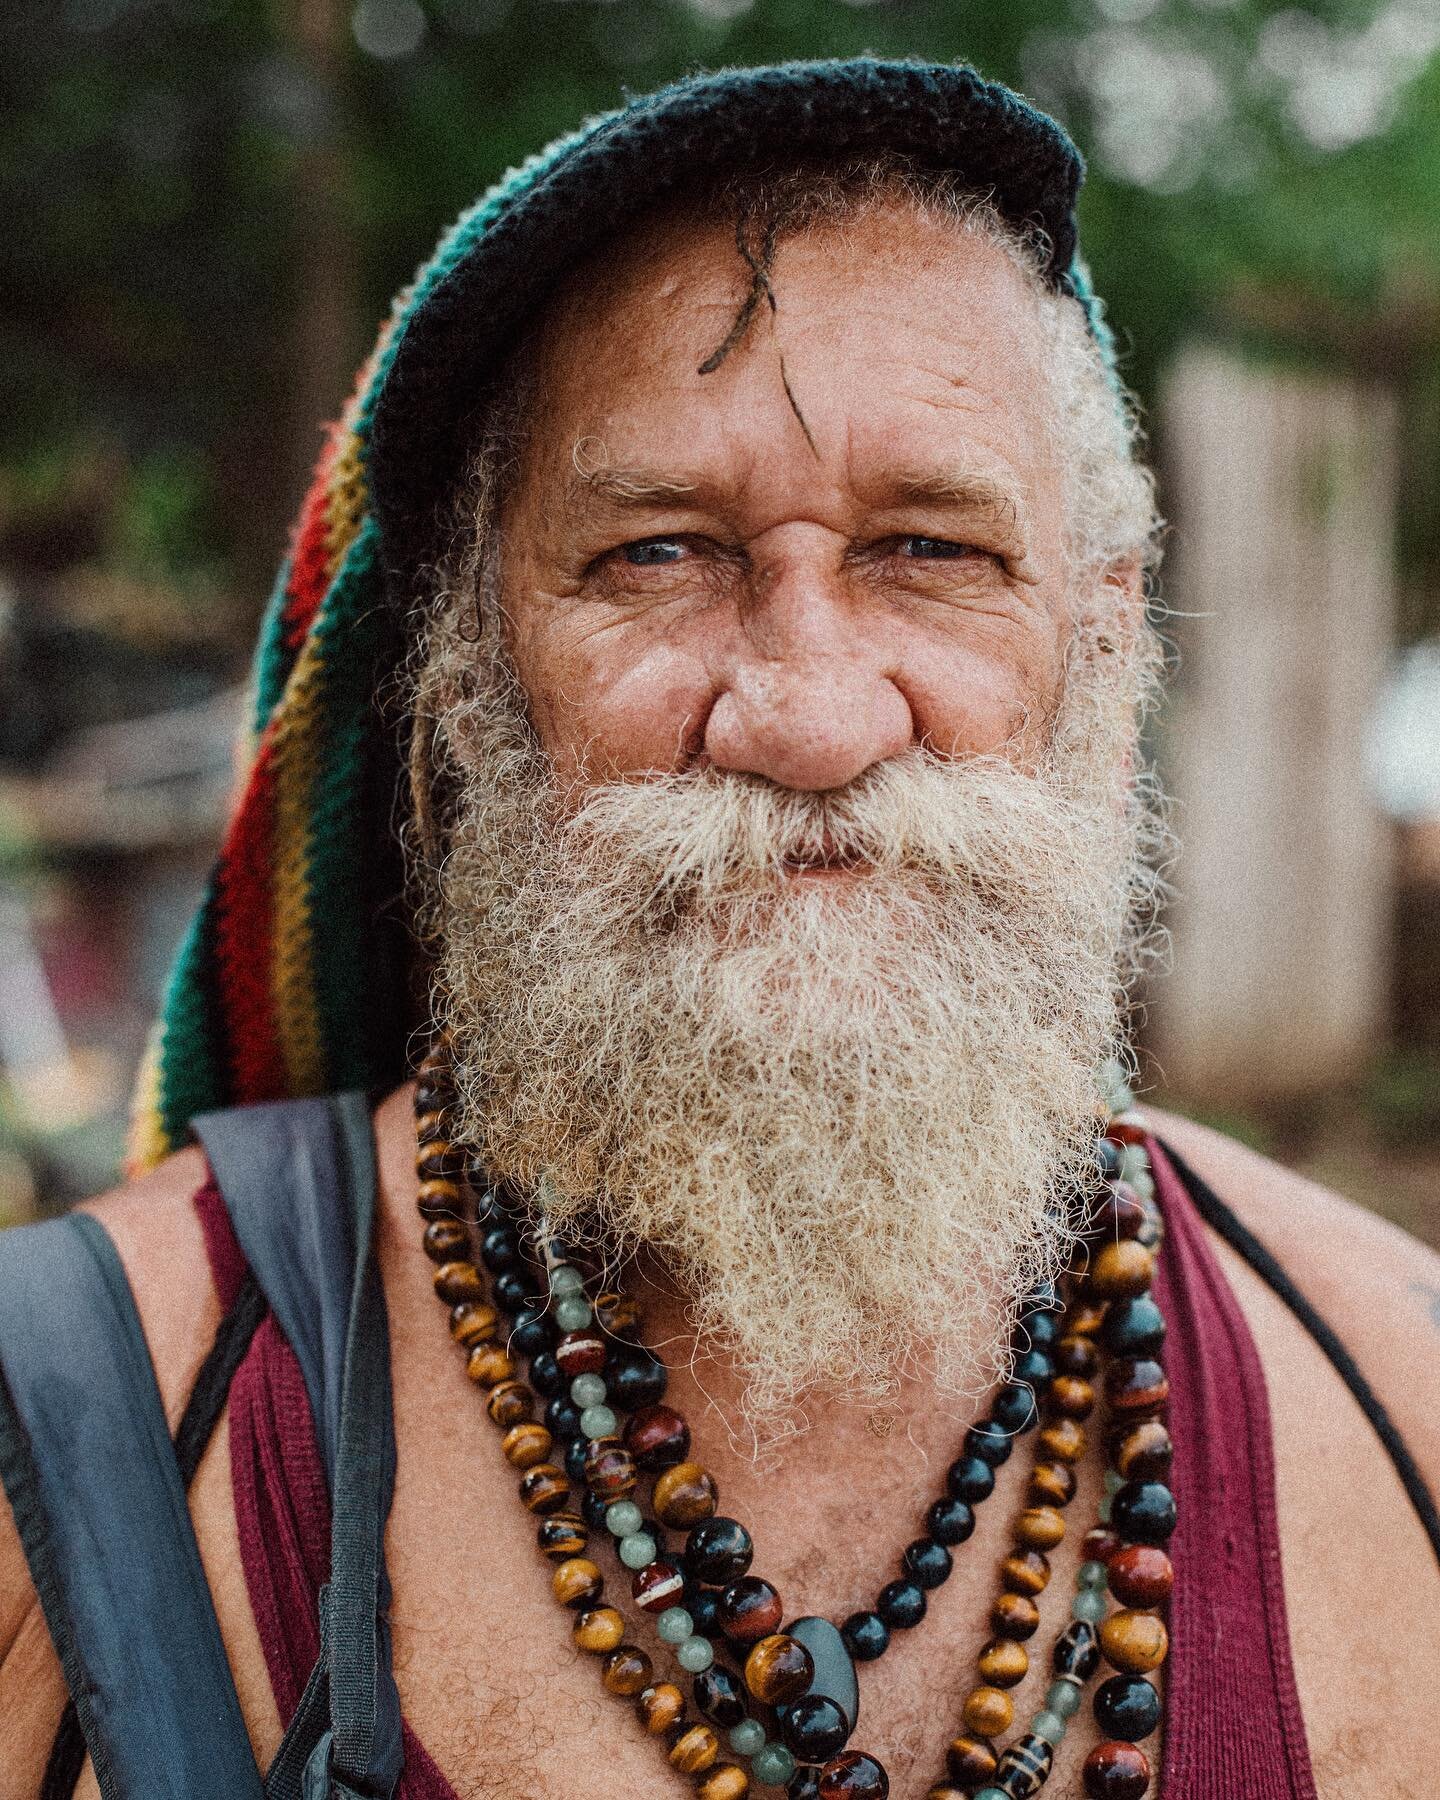 While in Guadeloupe, we went to the Islands Les Saintes. 

The first image is the only portrait I managed to take during our trip, I was just so intrigued by his face. 

#guadeloupe #guadeloupeislands #lessaintes #terredehaut #reportage #womenphotogr